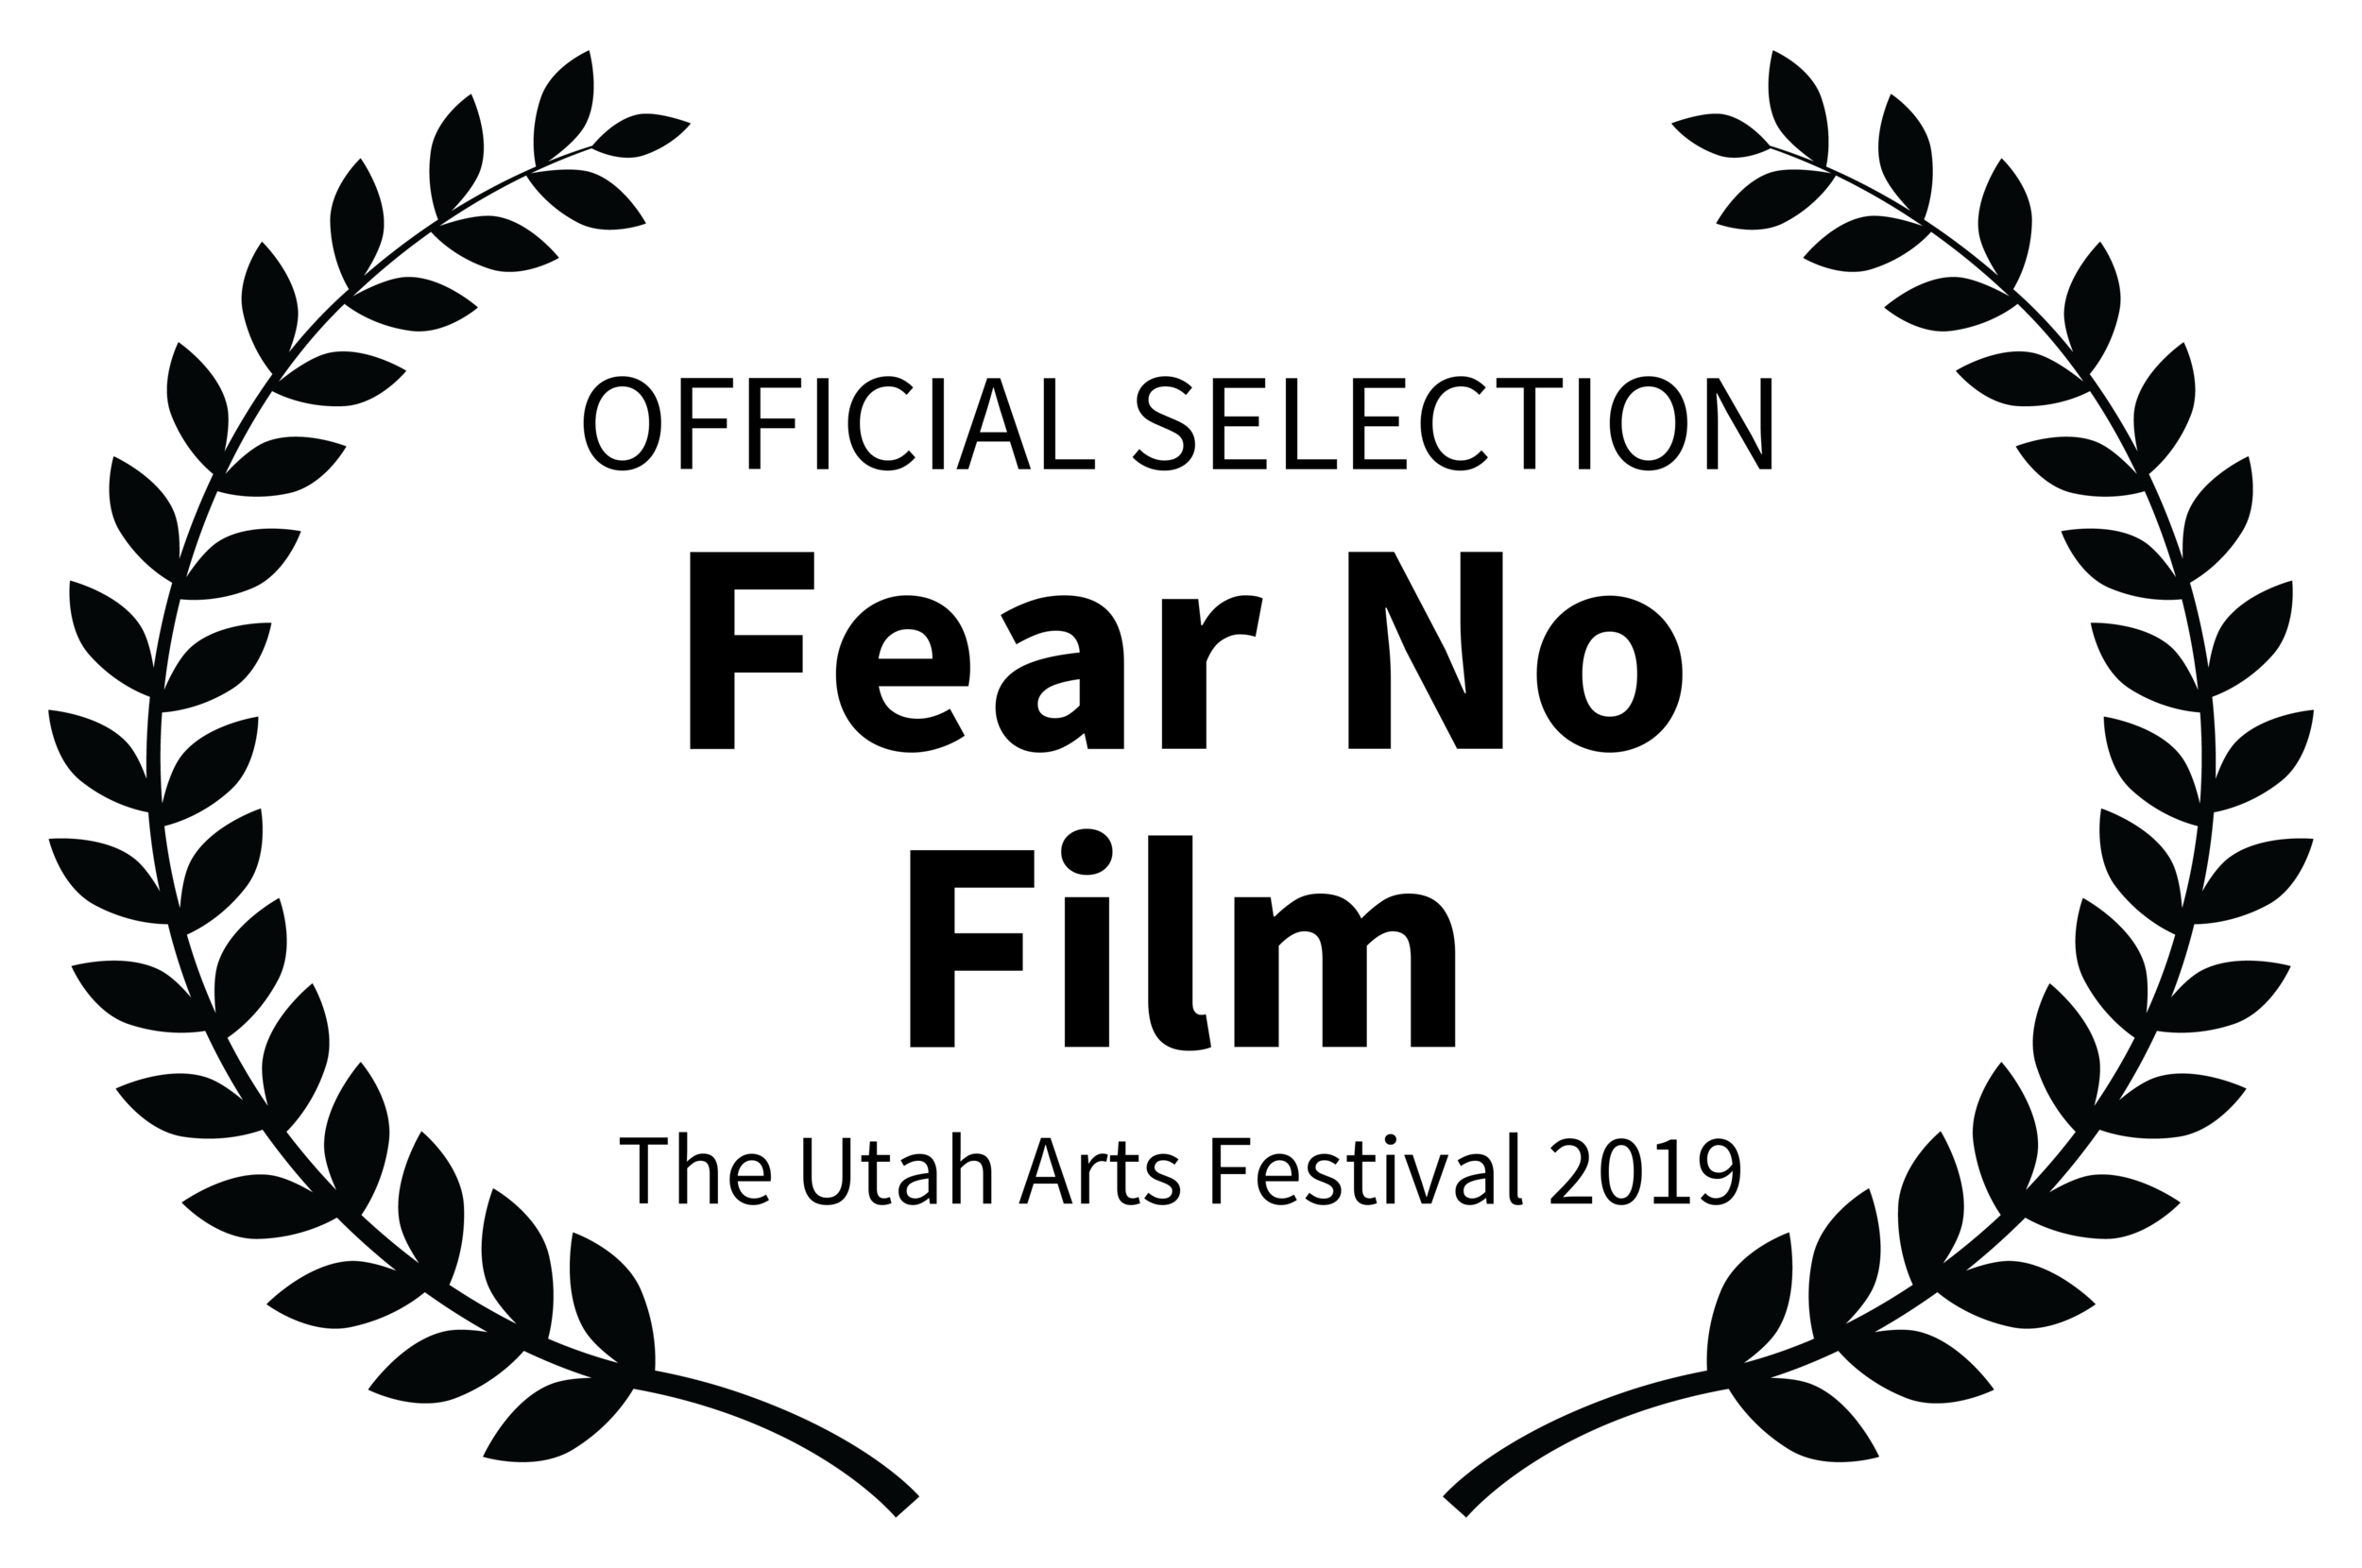 OFFICIALSELECTION-FearNoFilm-TheUtahArtsFestival2019 (1).png